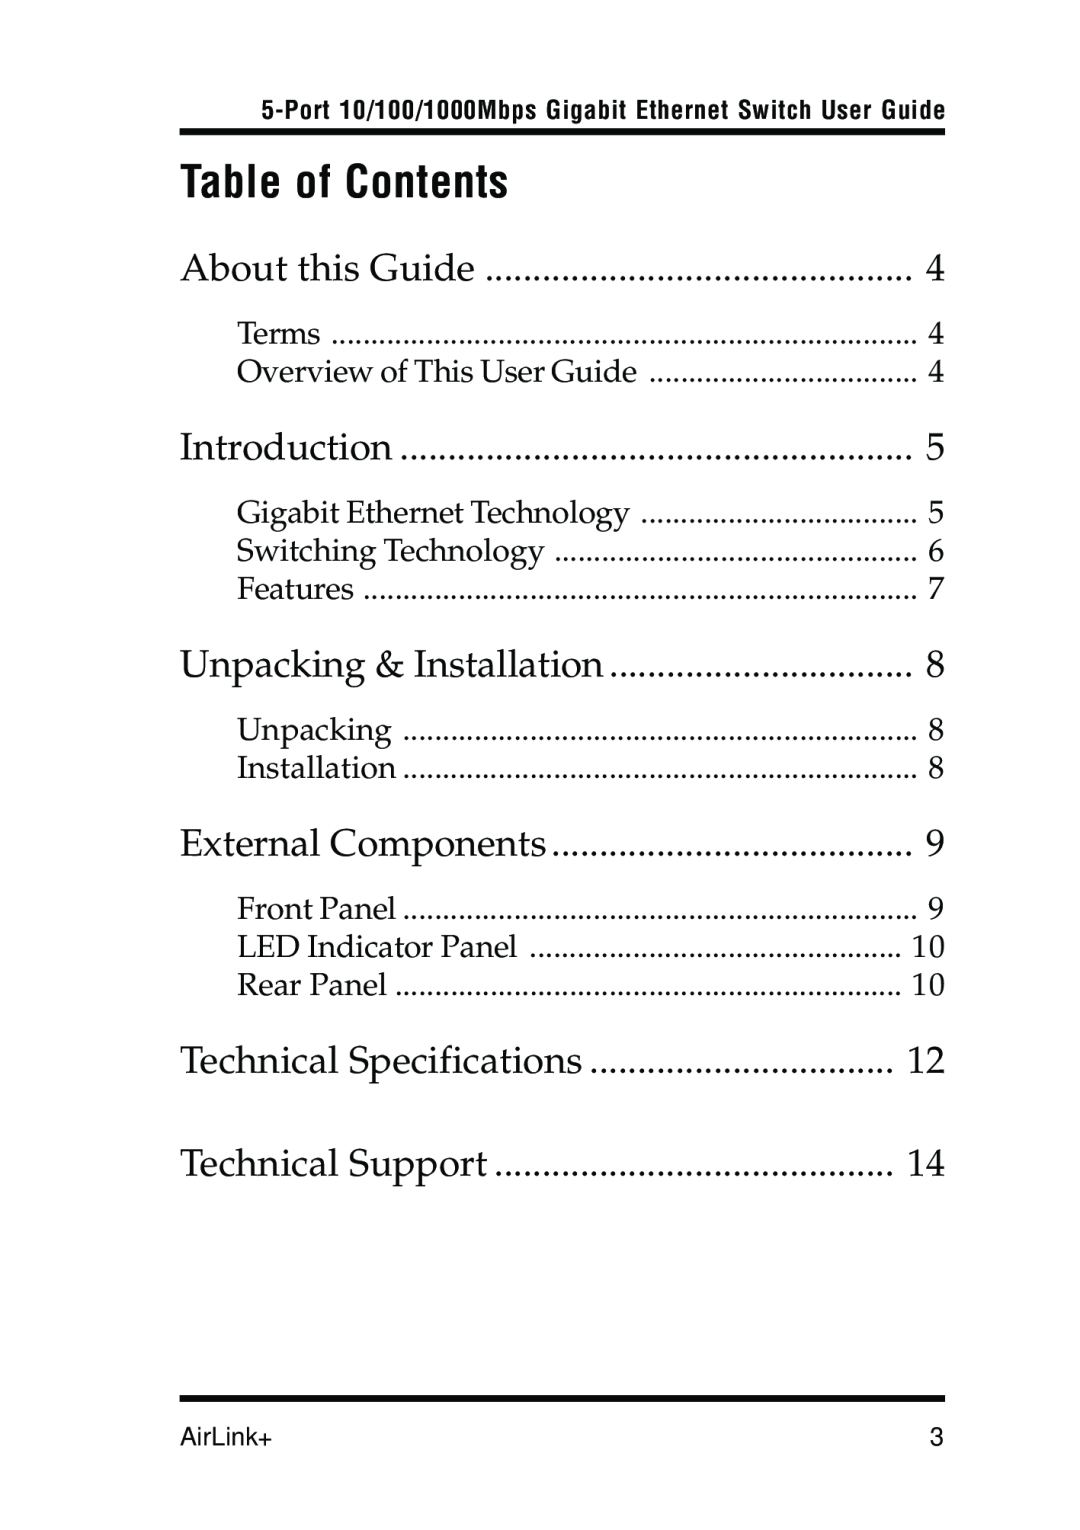 Airlink UG-AGIGA5SW-1105 Table of Contents, About this Guide, Introduction, Unpacking & Installation, External Components 